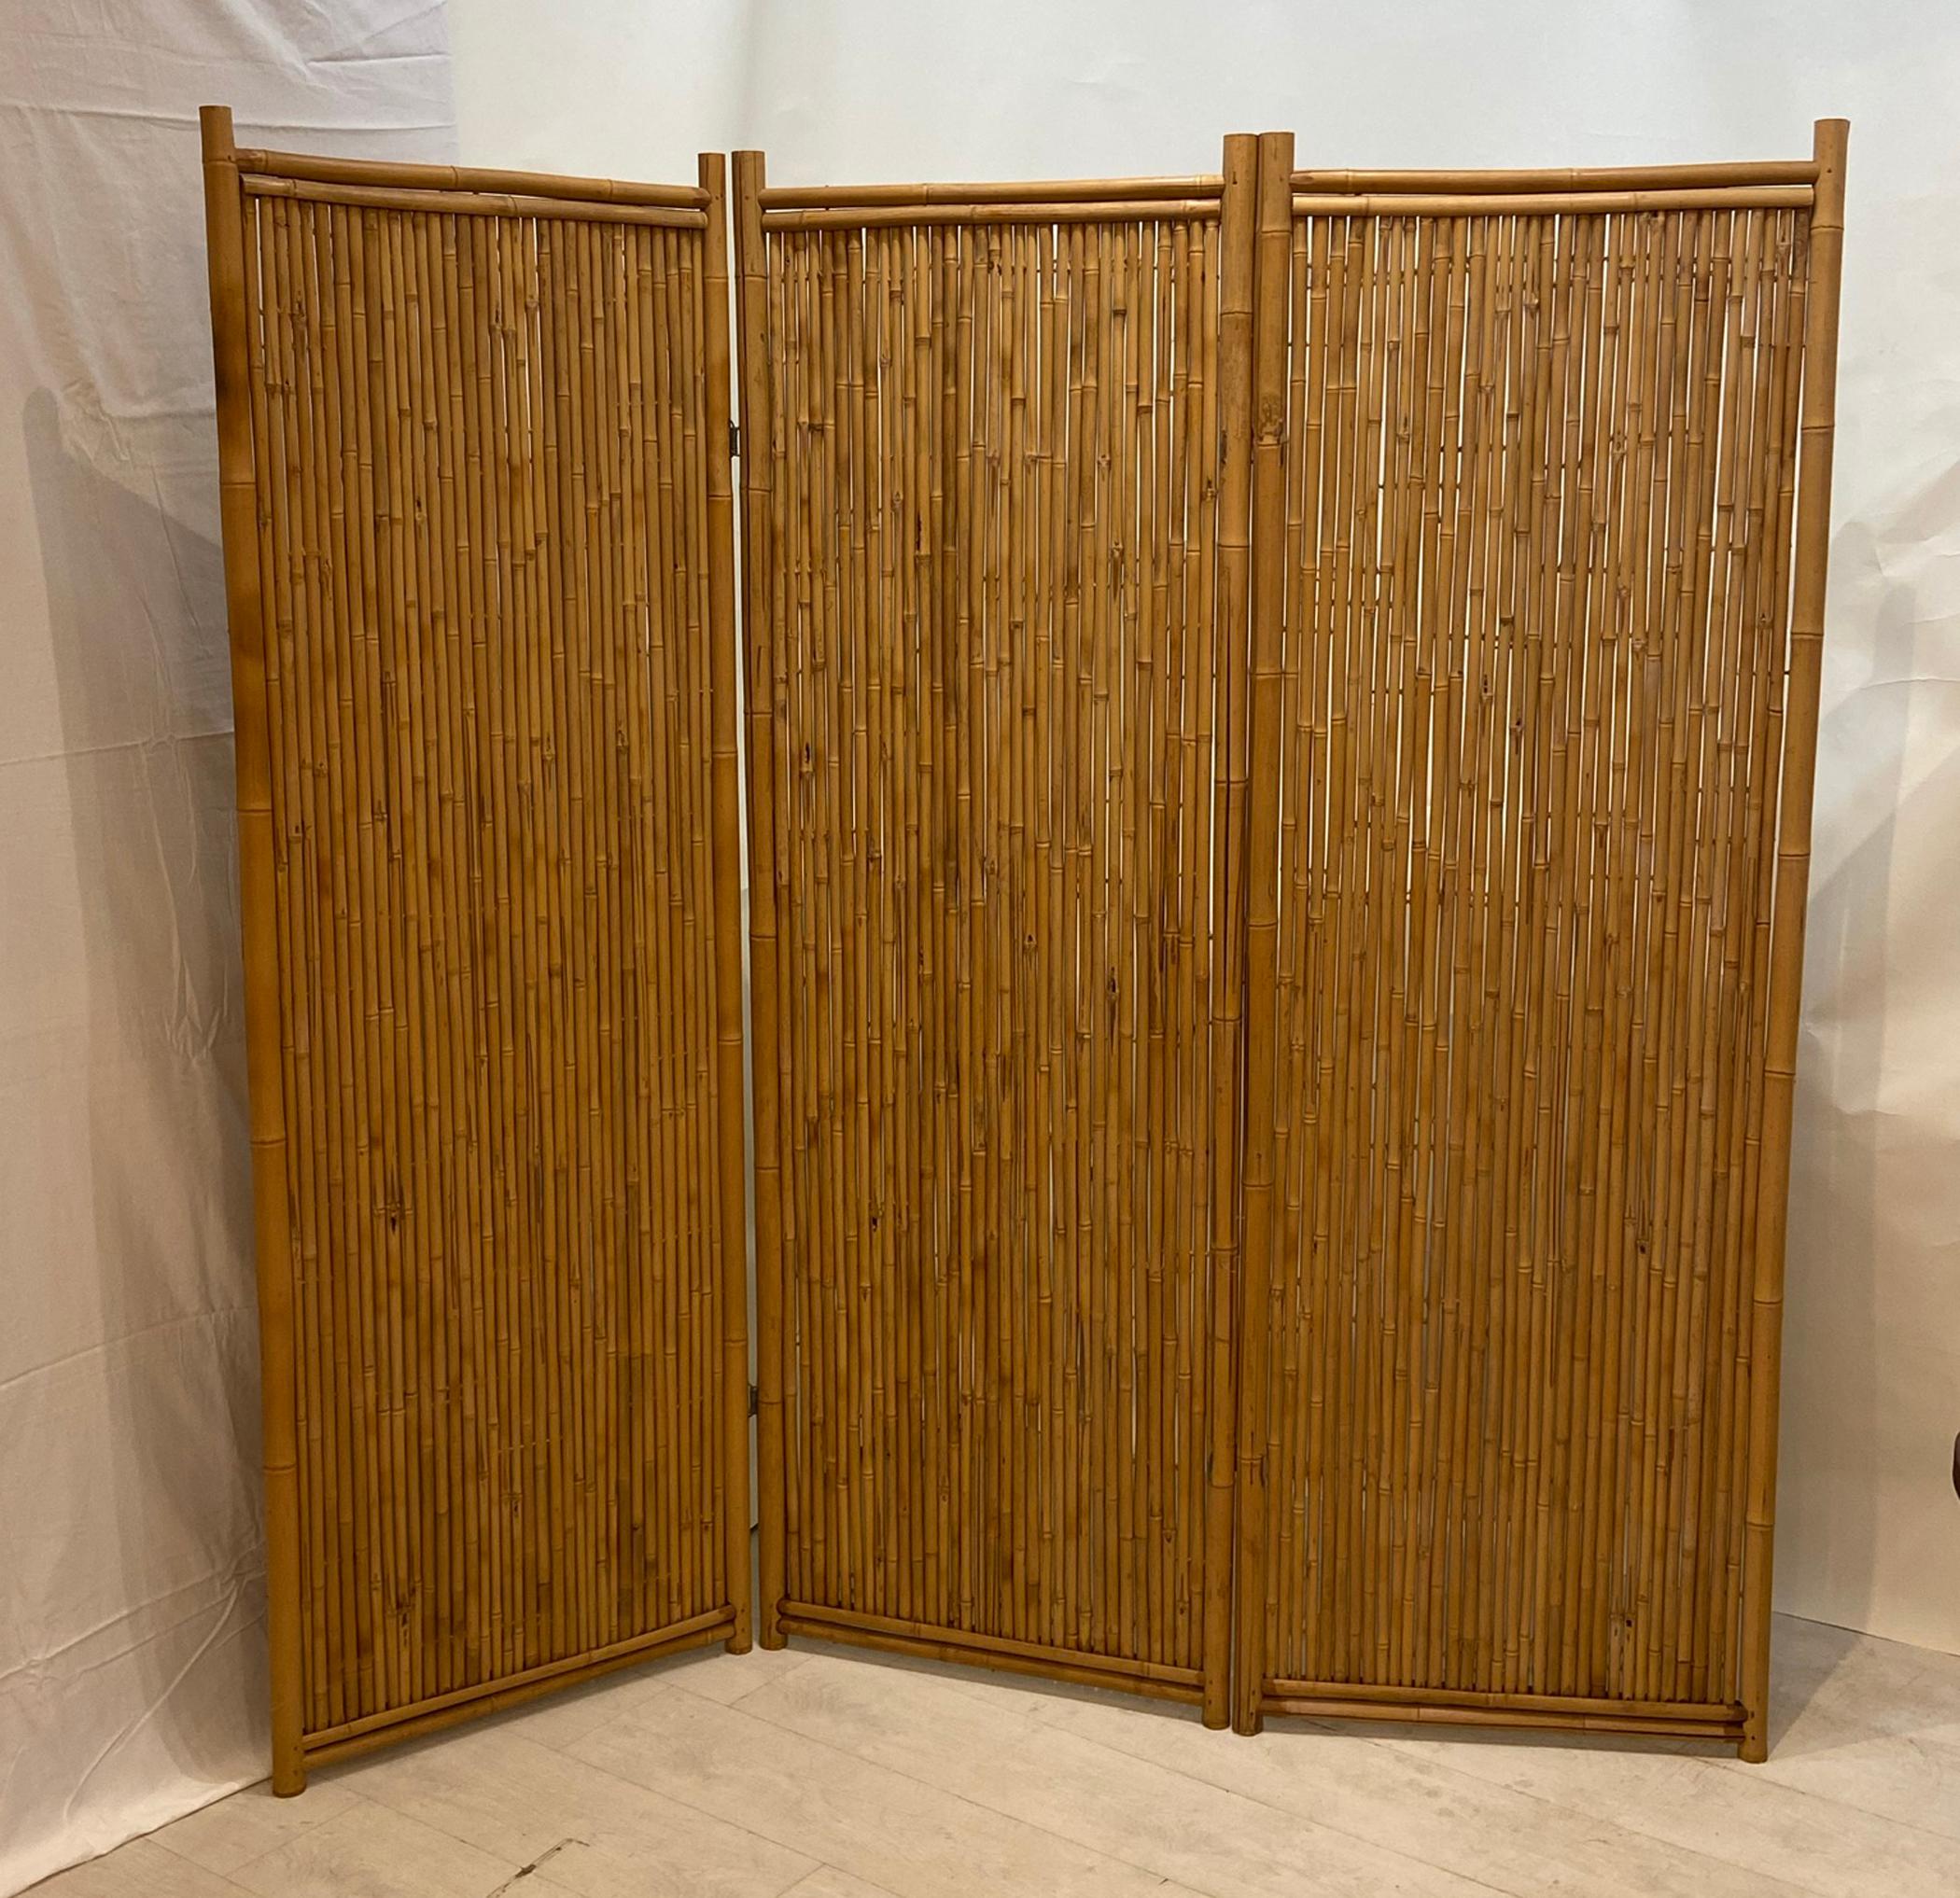 Large three panel bamboo screen. An older well constructed bamboo screen. Good even natural golden finish. Wire type hinges nice large screen